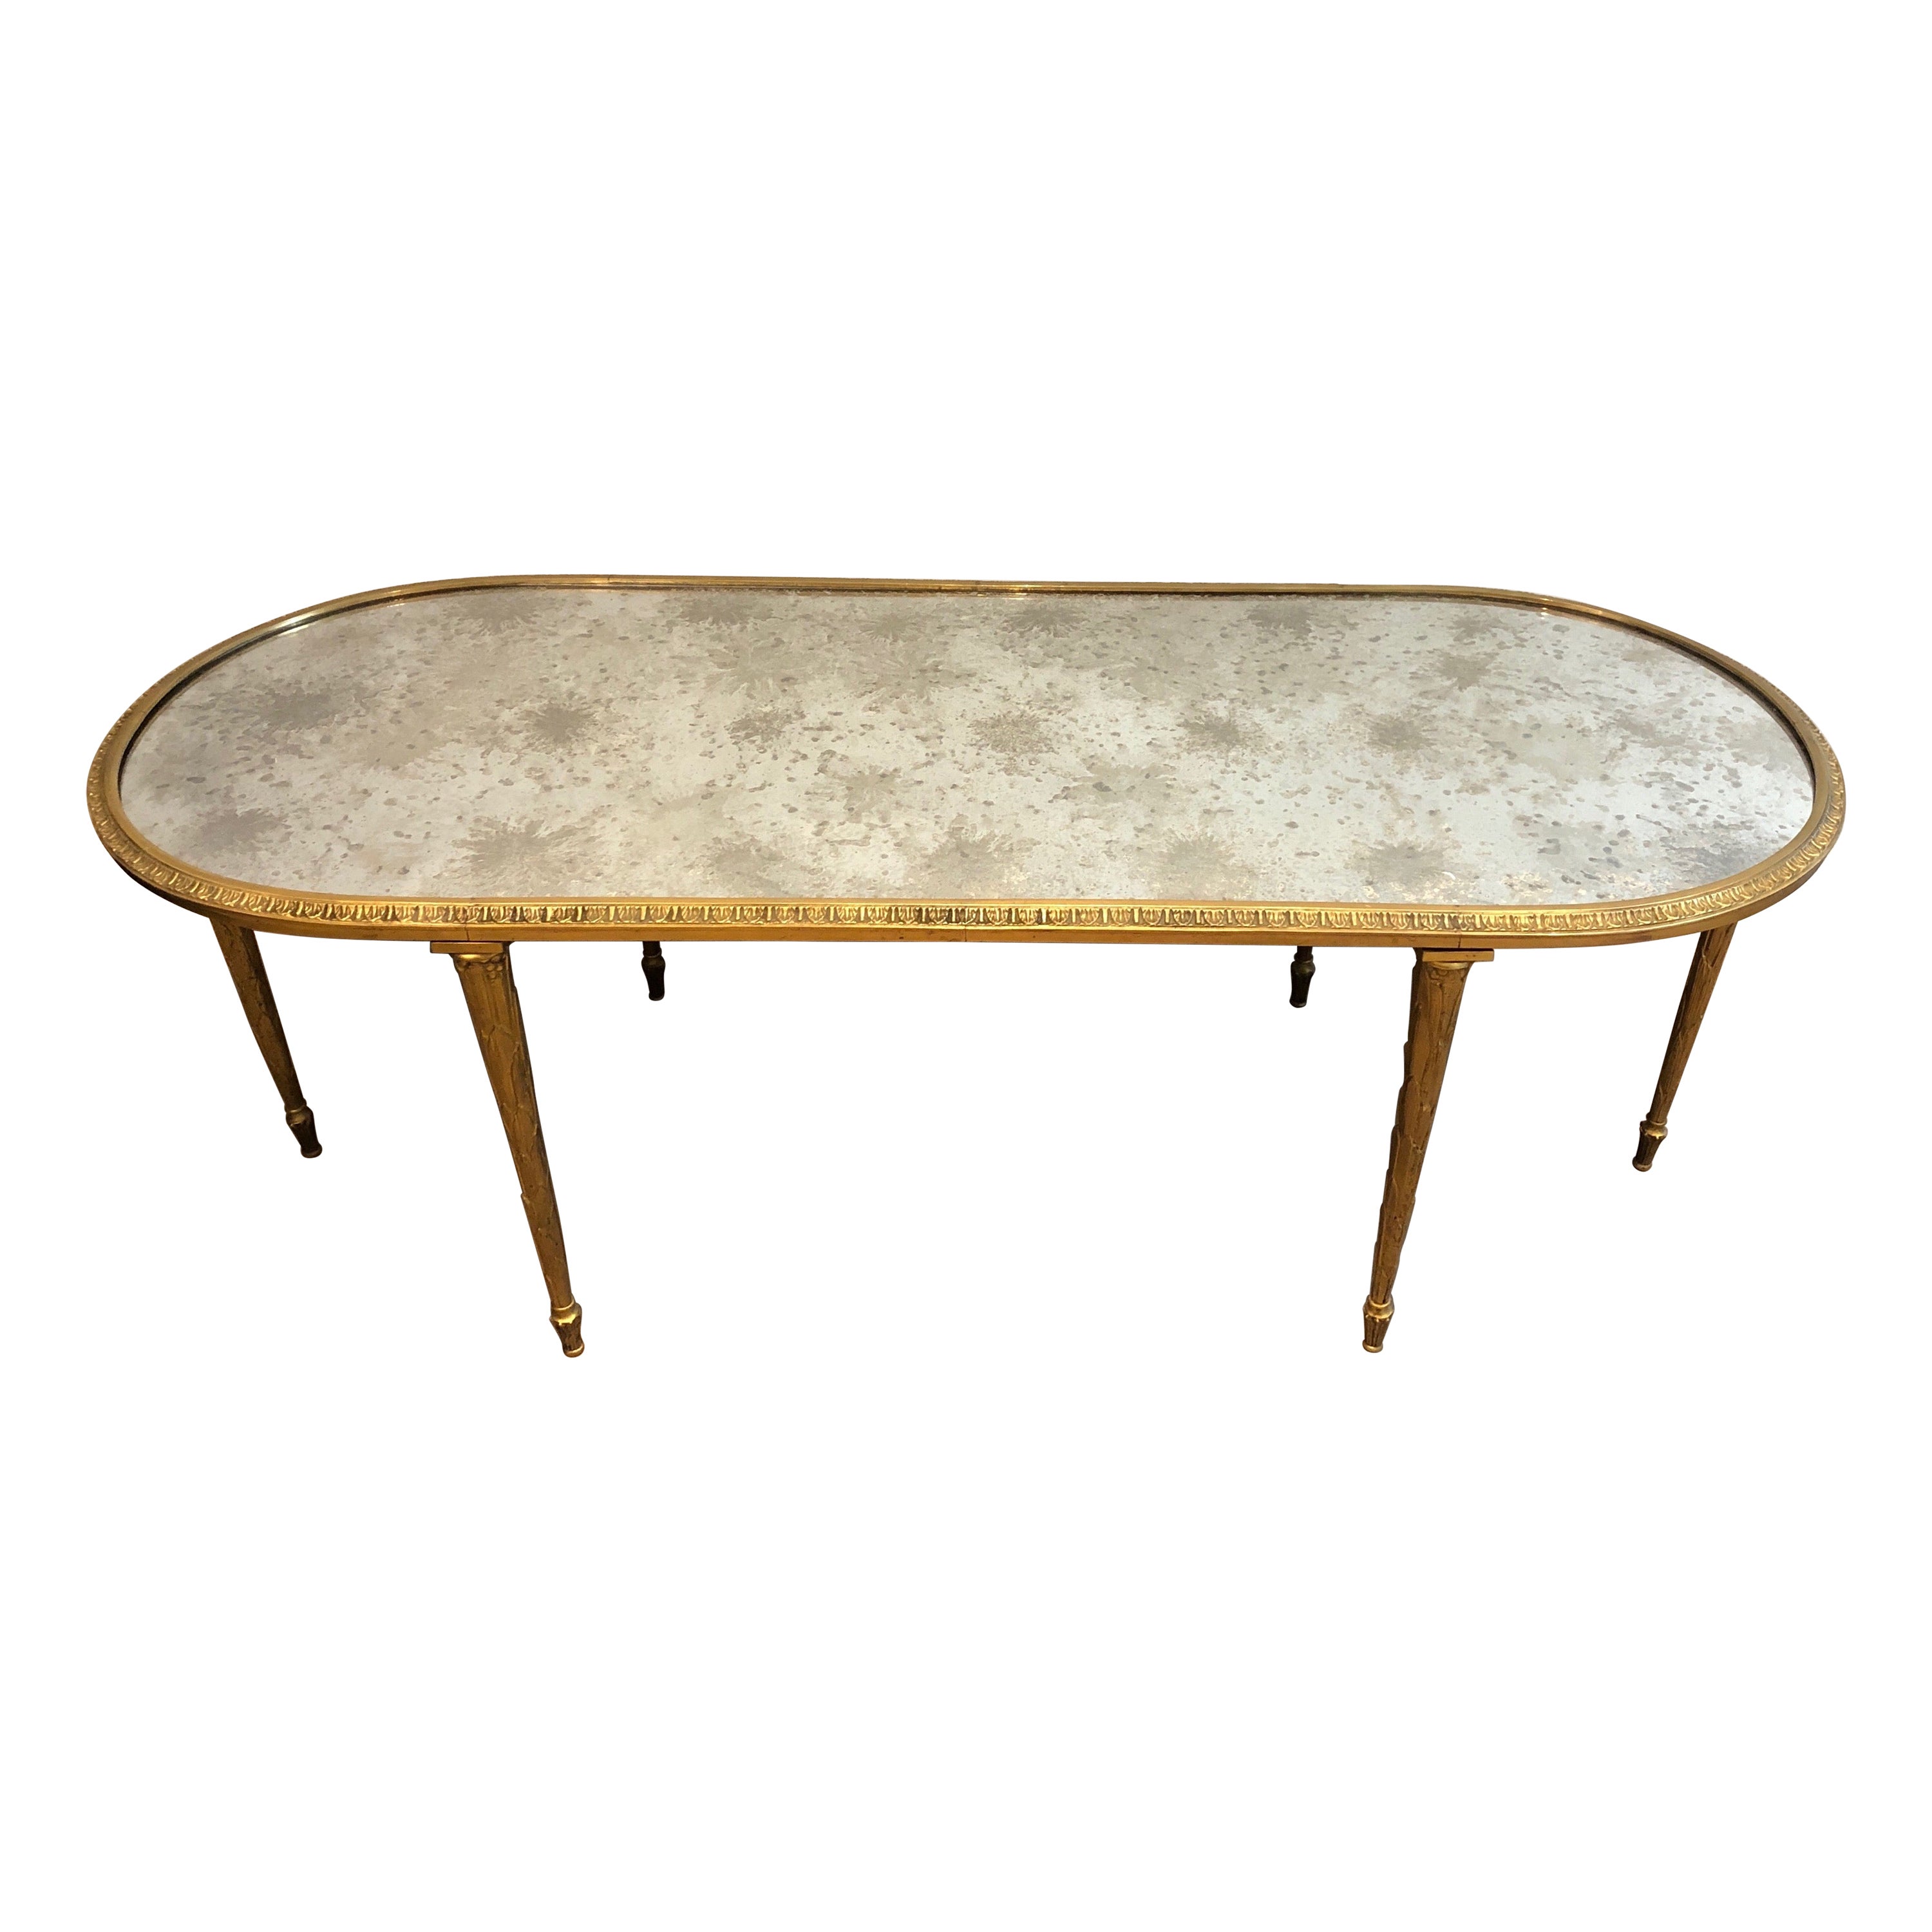 Faux-Bamboo Bronze Coffee Table with Eglomised Mirror Top by Maison Baguès